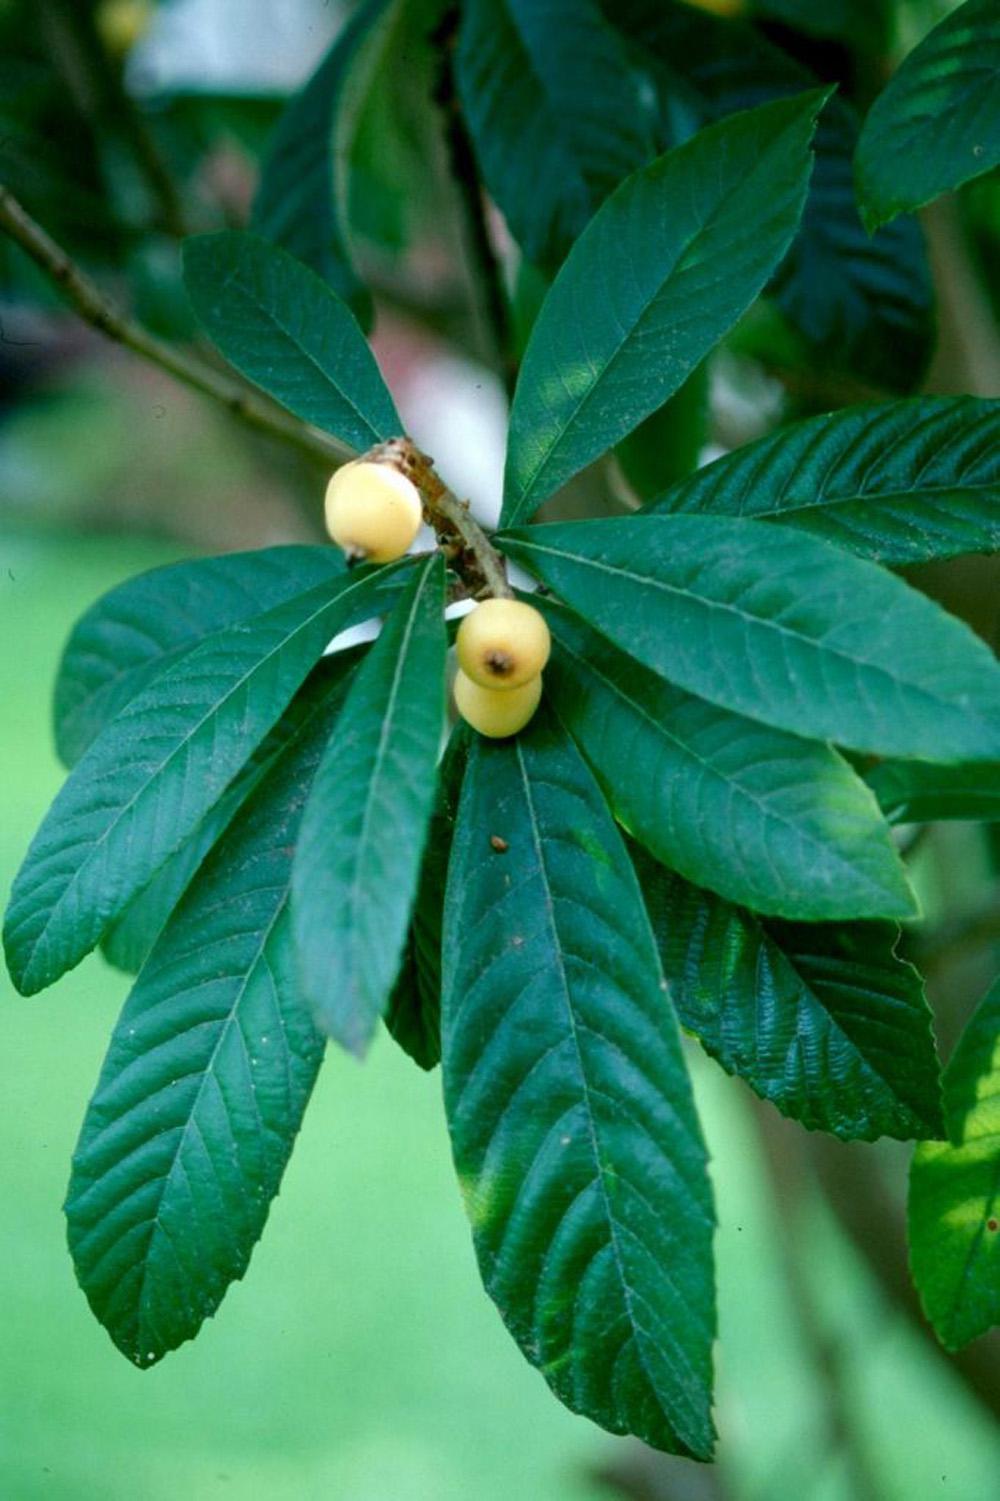 The Japanese loquat assumes a rounded form and is normally under 20 feet tall, perfect for those areas needing a small tree. The furrylooking white flowers form in the early fall and are deliciously scented. Plus, if the winter is mild, the creamy white flowers will yield a real delicacy for the table.